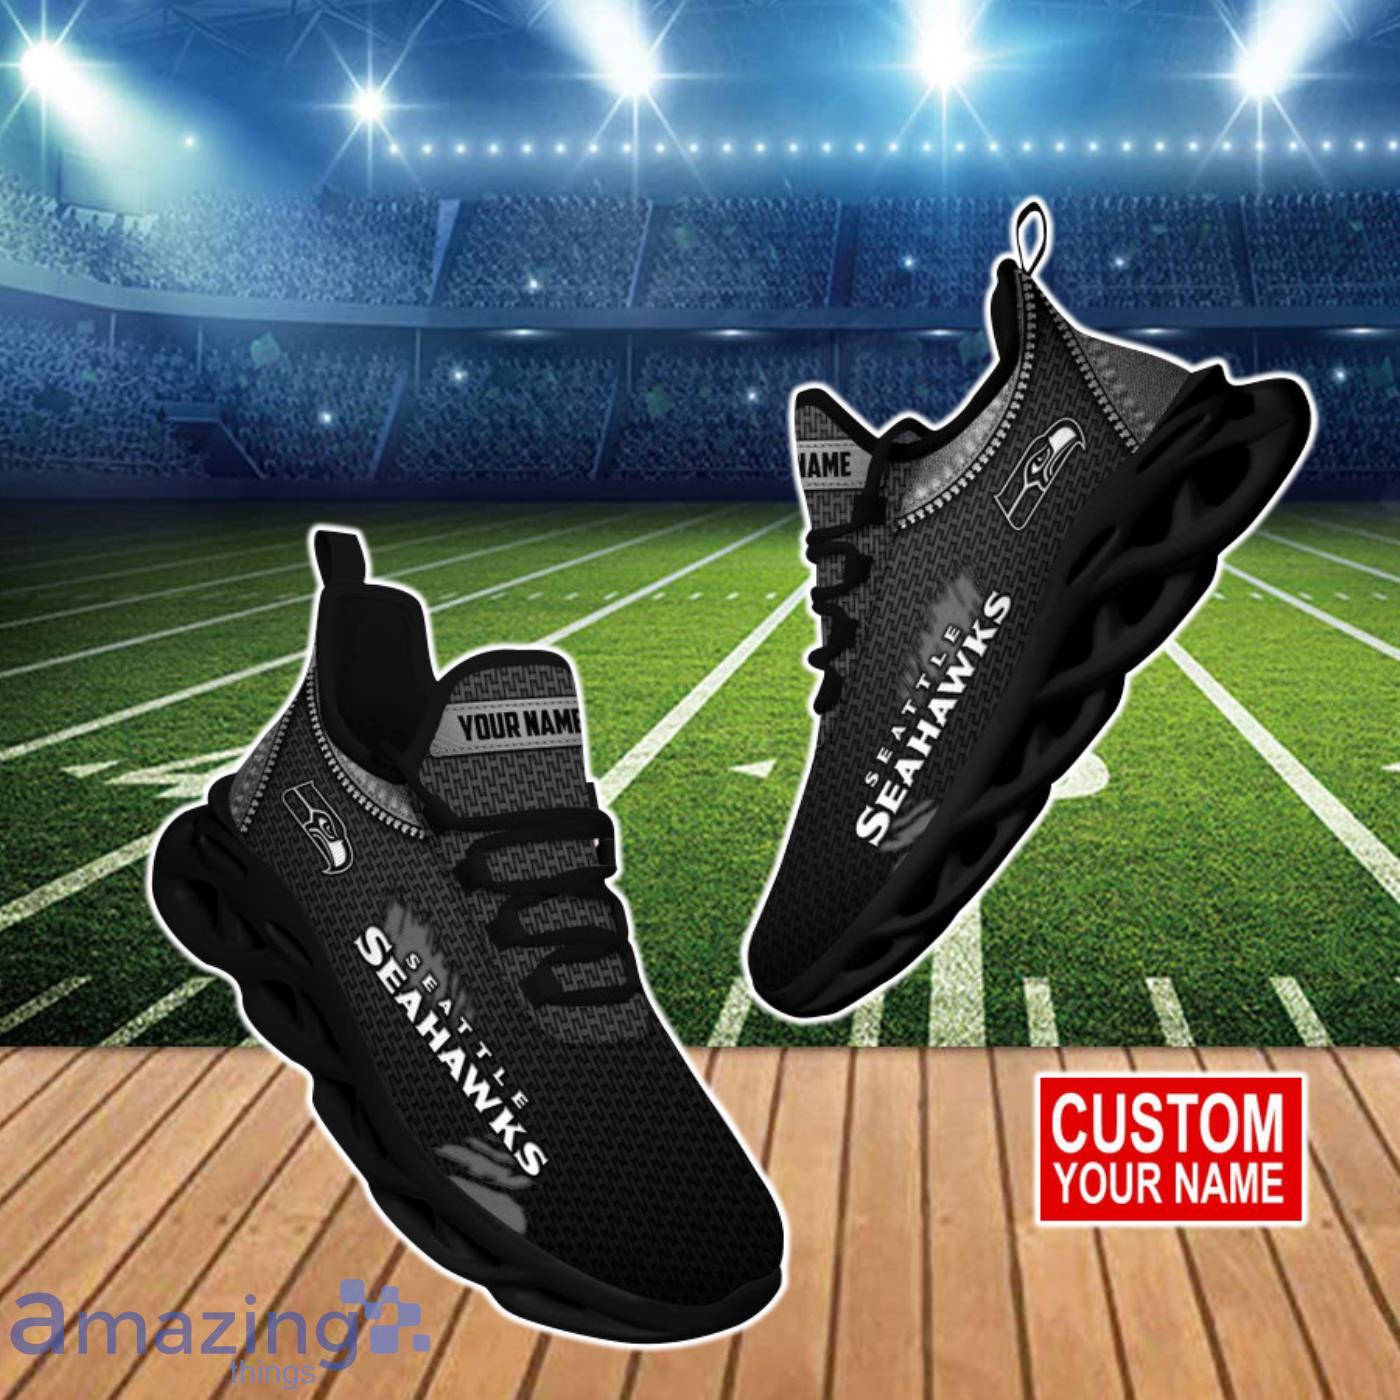 Seattle Seahawks NFL Clunky Max Soul Shoes Custom Name Ideal Gift For Fans Product Photo 1